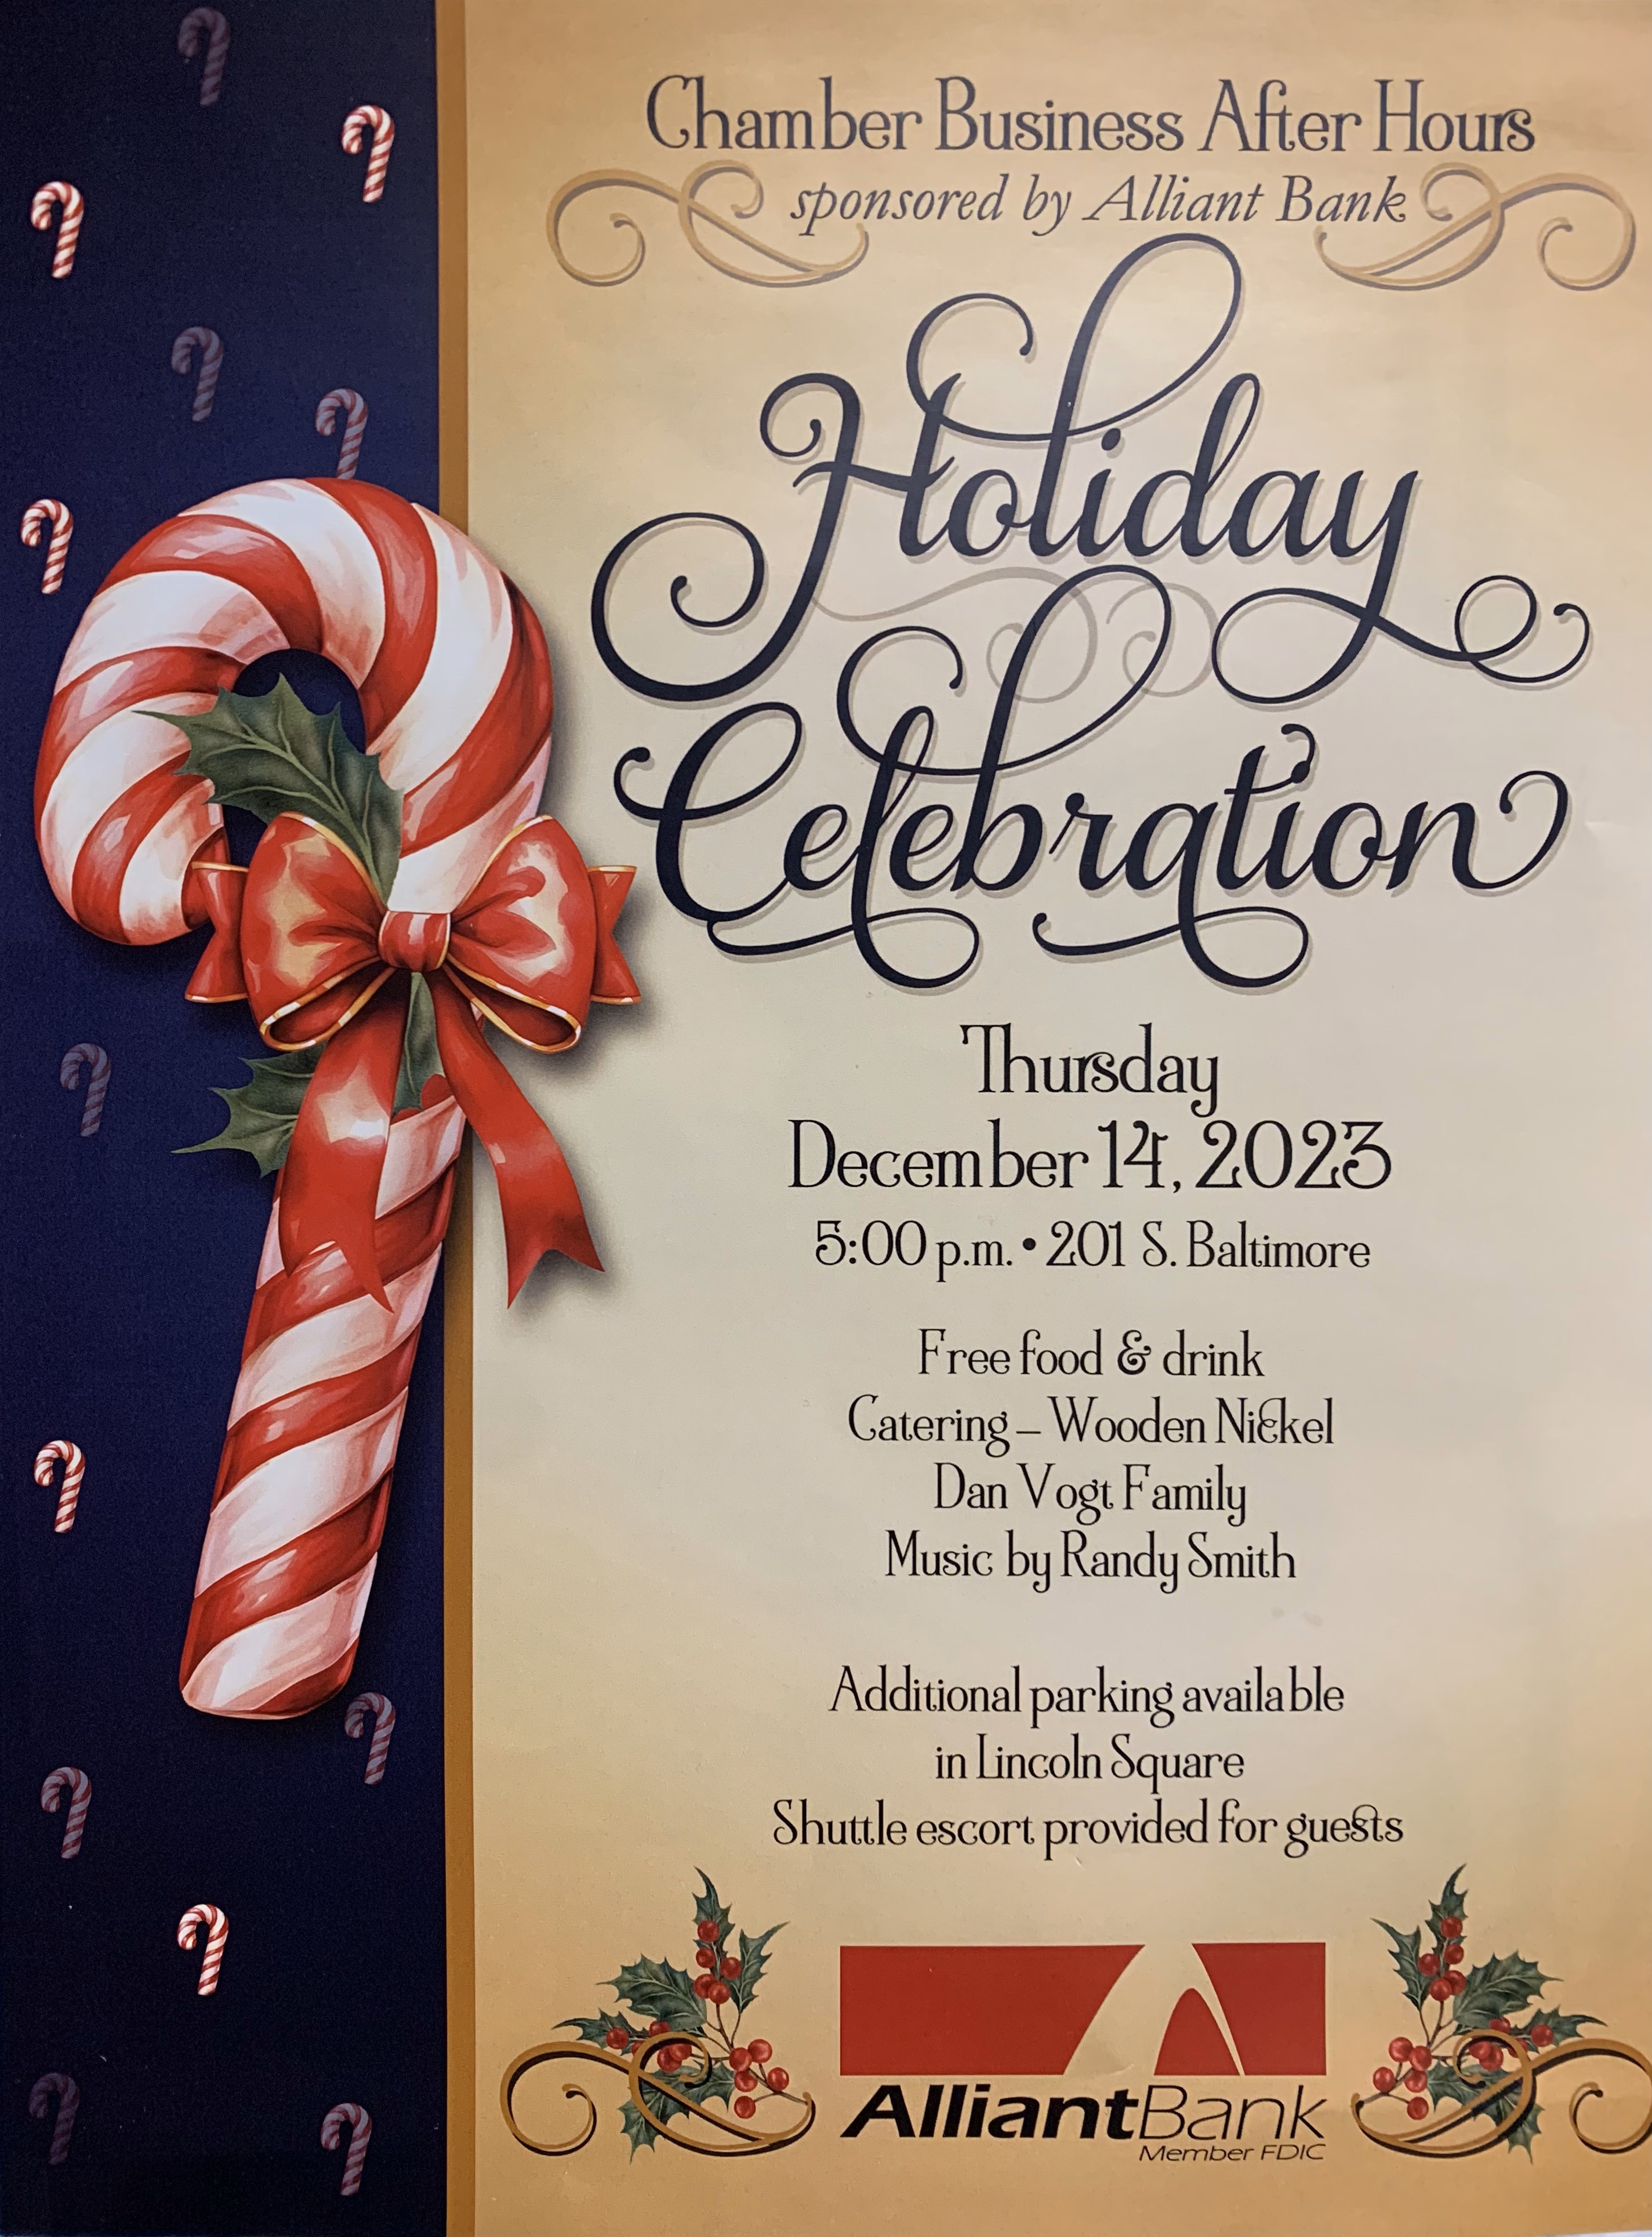 Join Us for a great Holiday Tradition